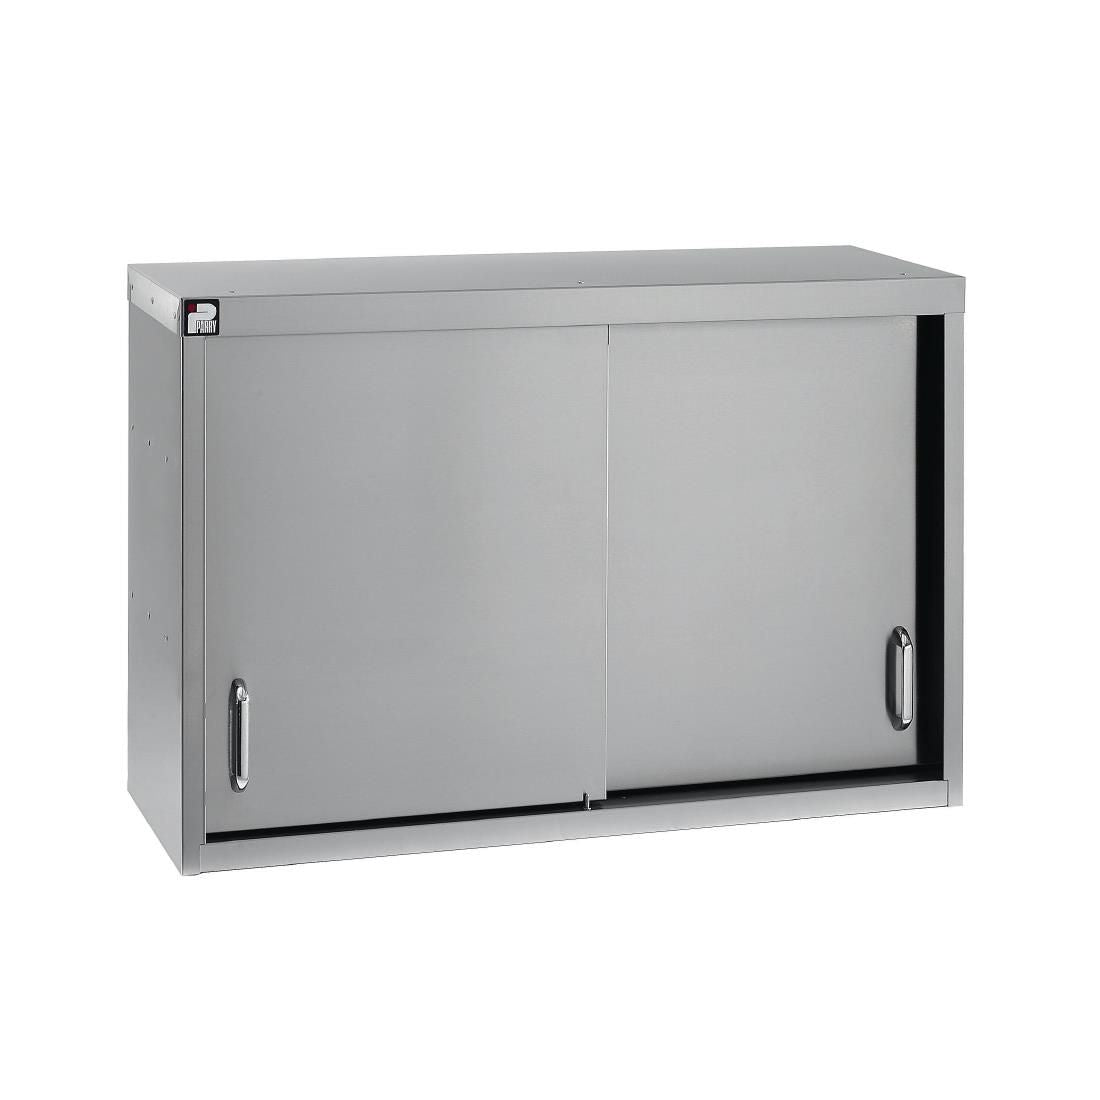 GM733 Parry Stainless Steel Sliding Door Wall Cupboard 900mm JD Catering Equipment Solutions Ltd